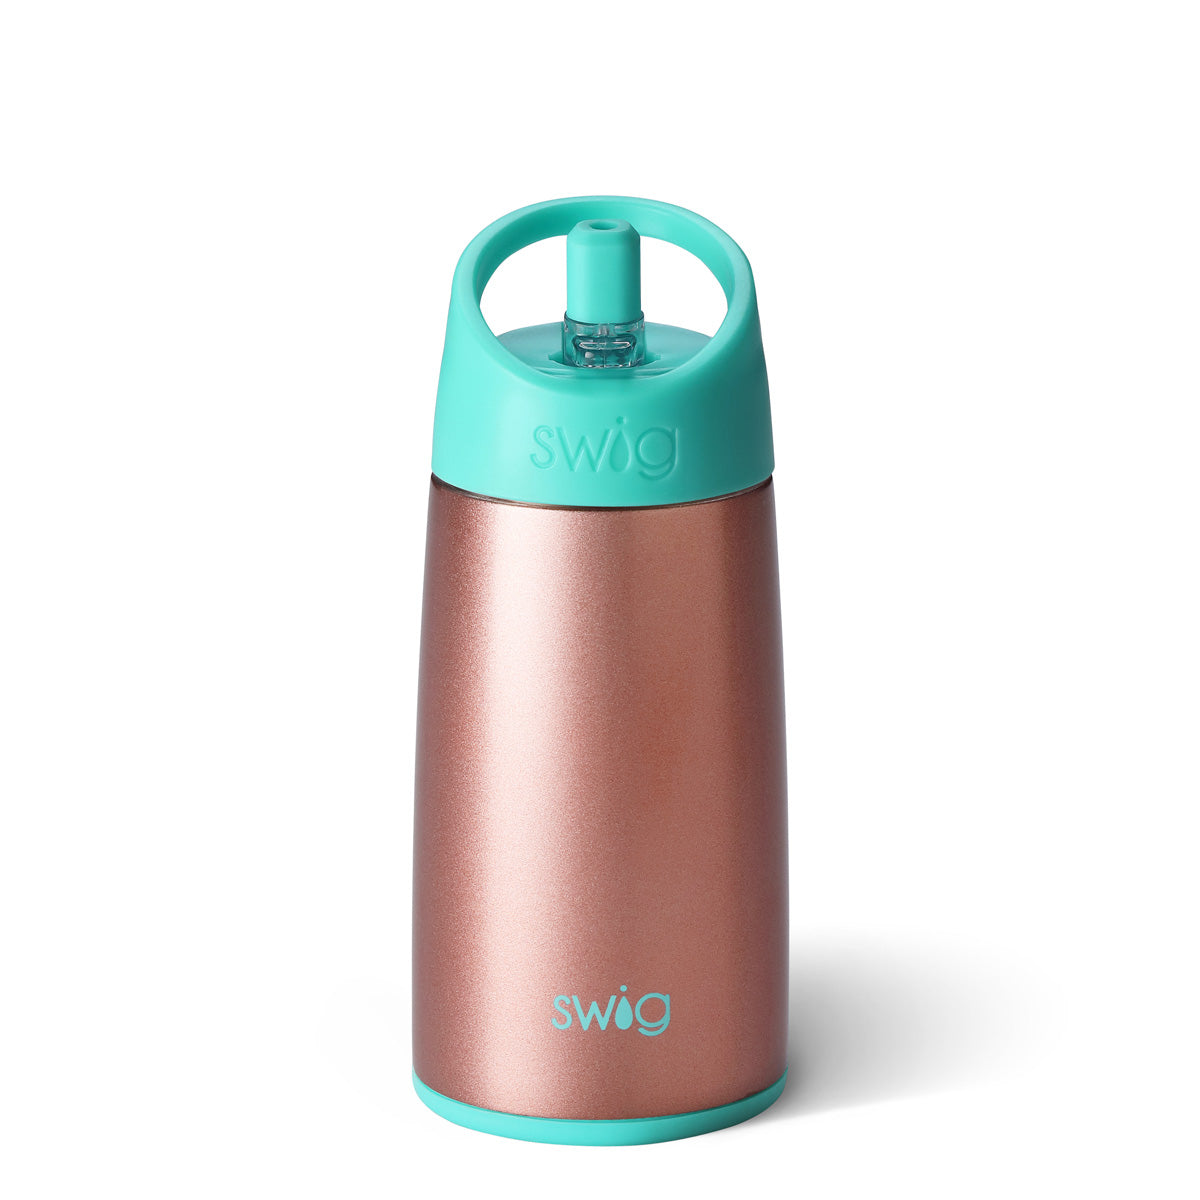 Swig brand 12 oz tumbler with a screw off lid featuring small straw coming out of the top. The tumbler is rose gold with a turquoise lid.